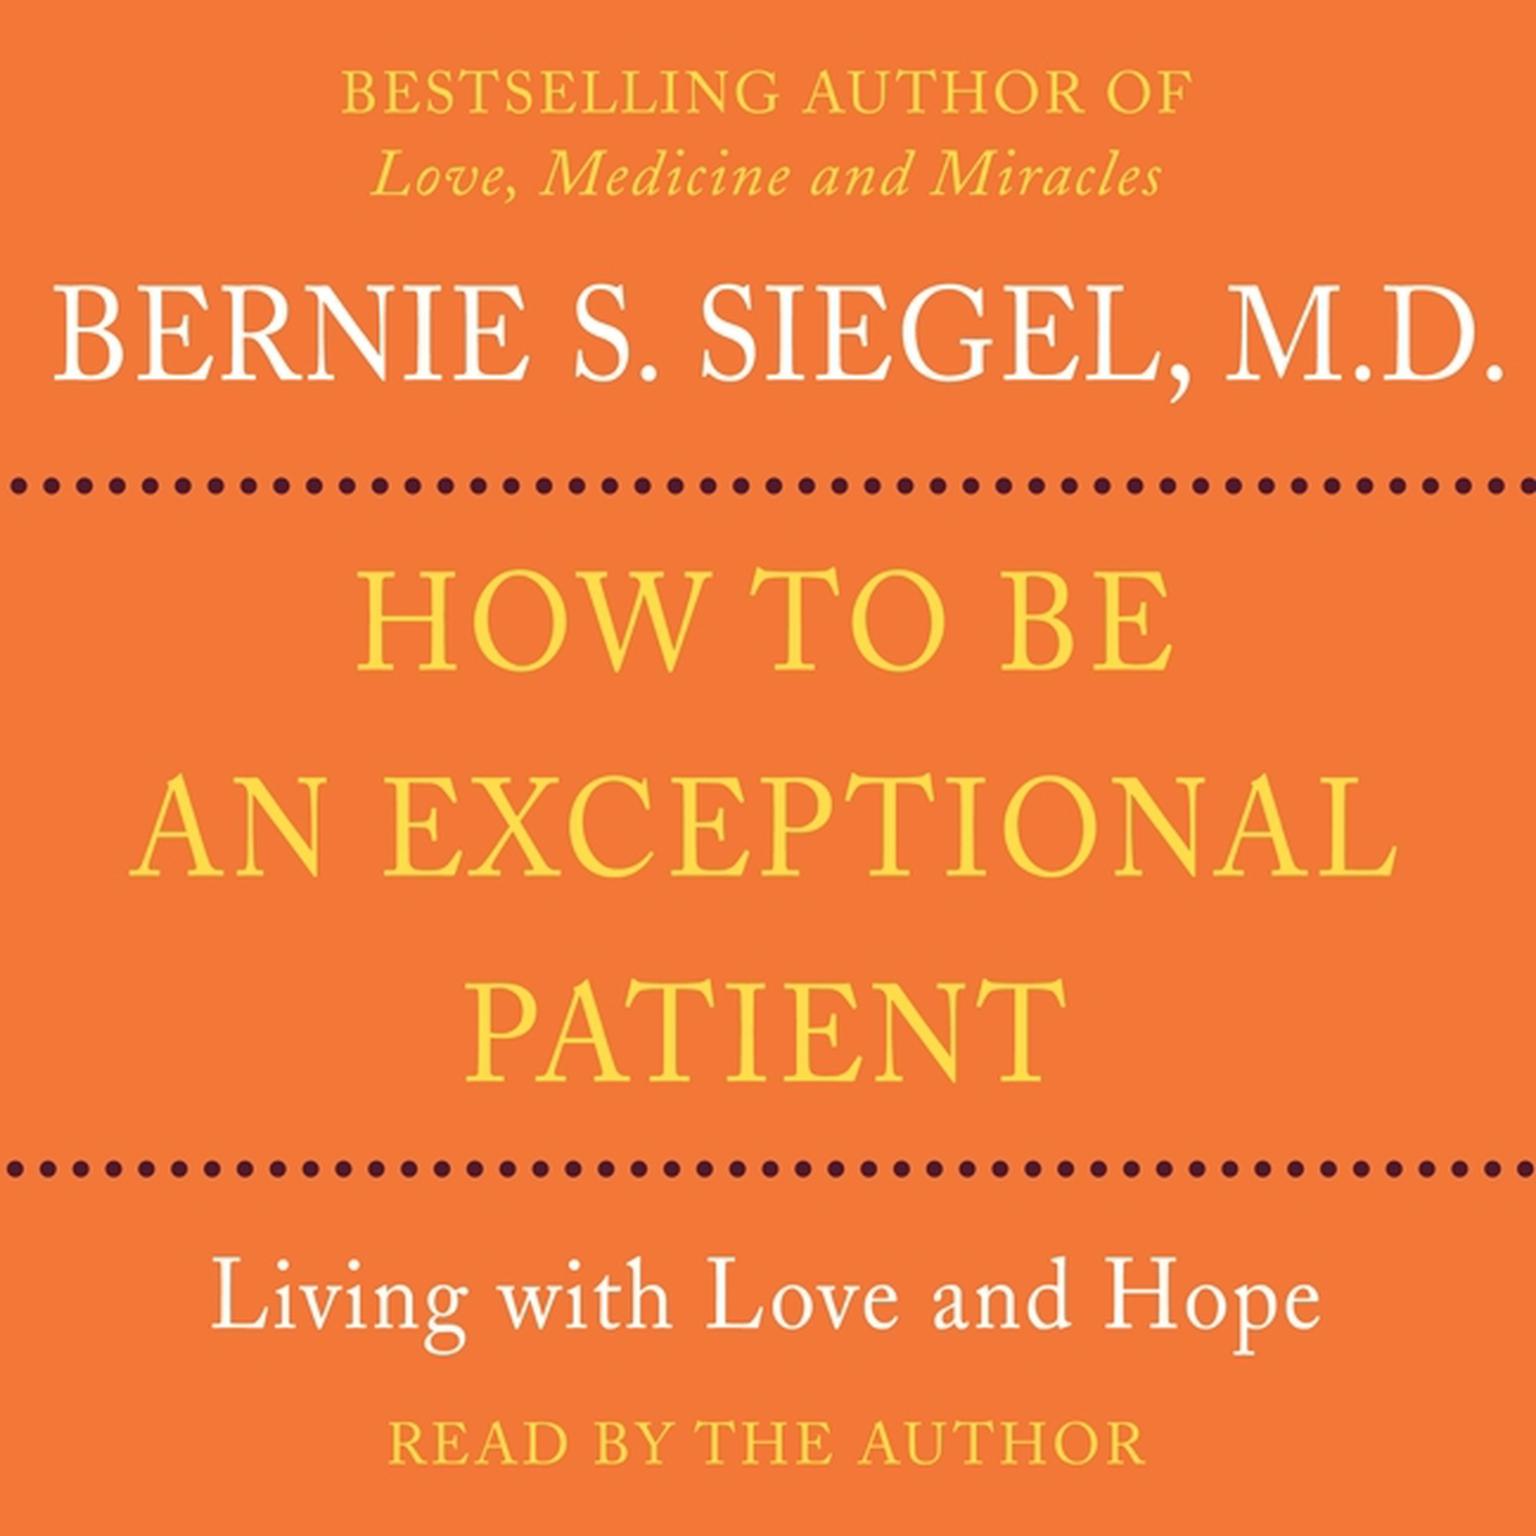 How to Be An Exceptional Patient (Abridged): Living with Love and Hope Audiobook, by Bernie Siegel